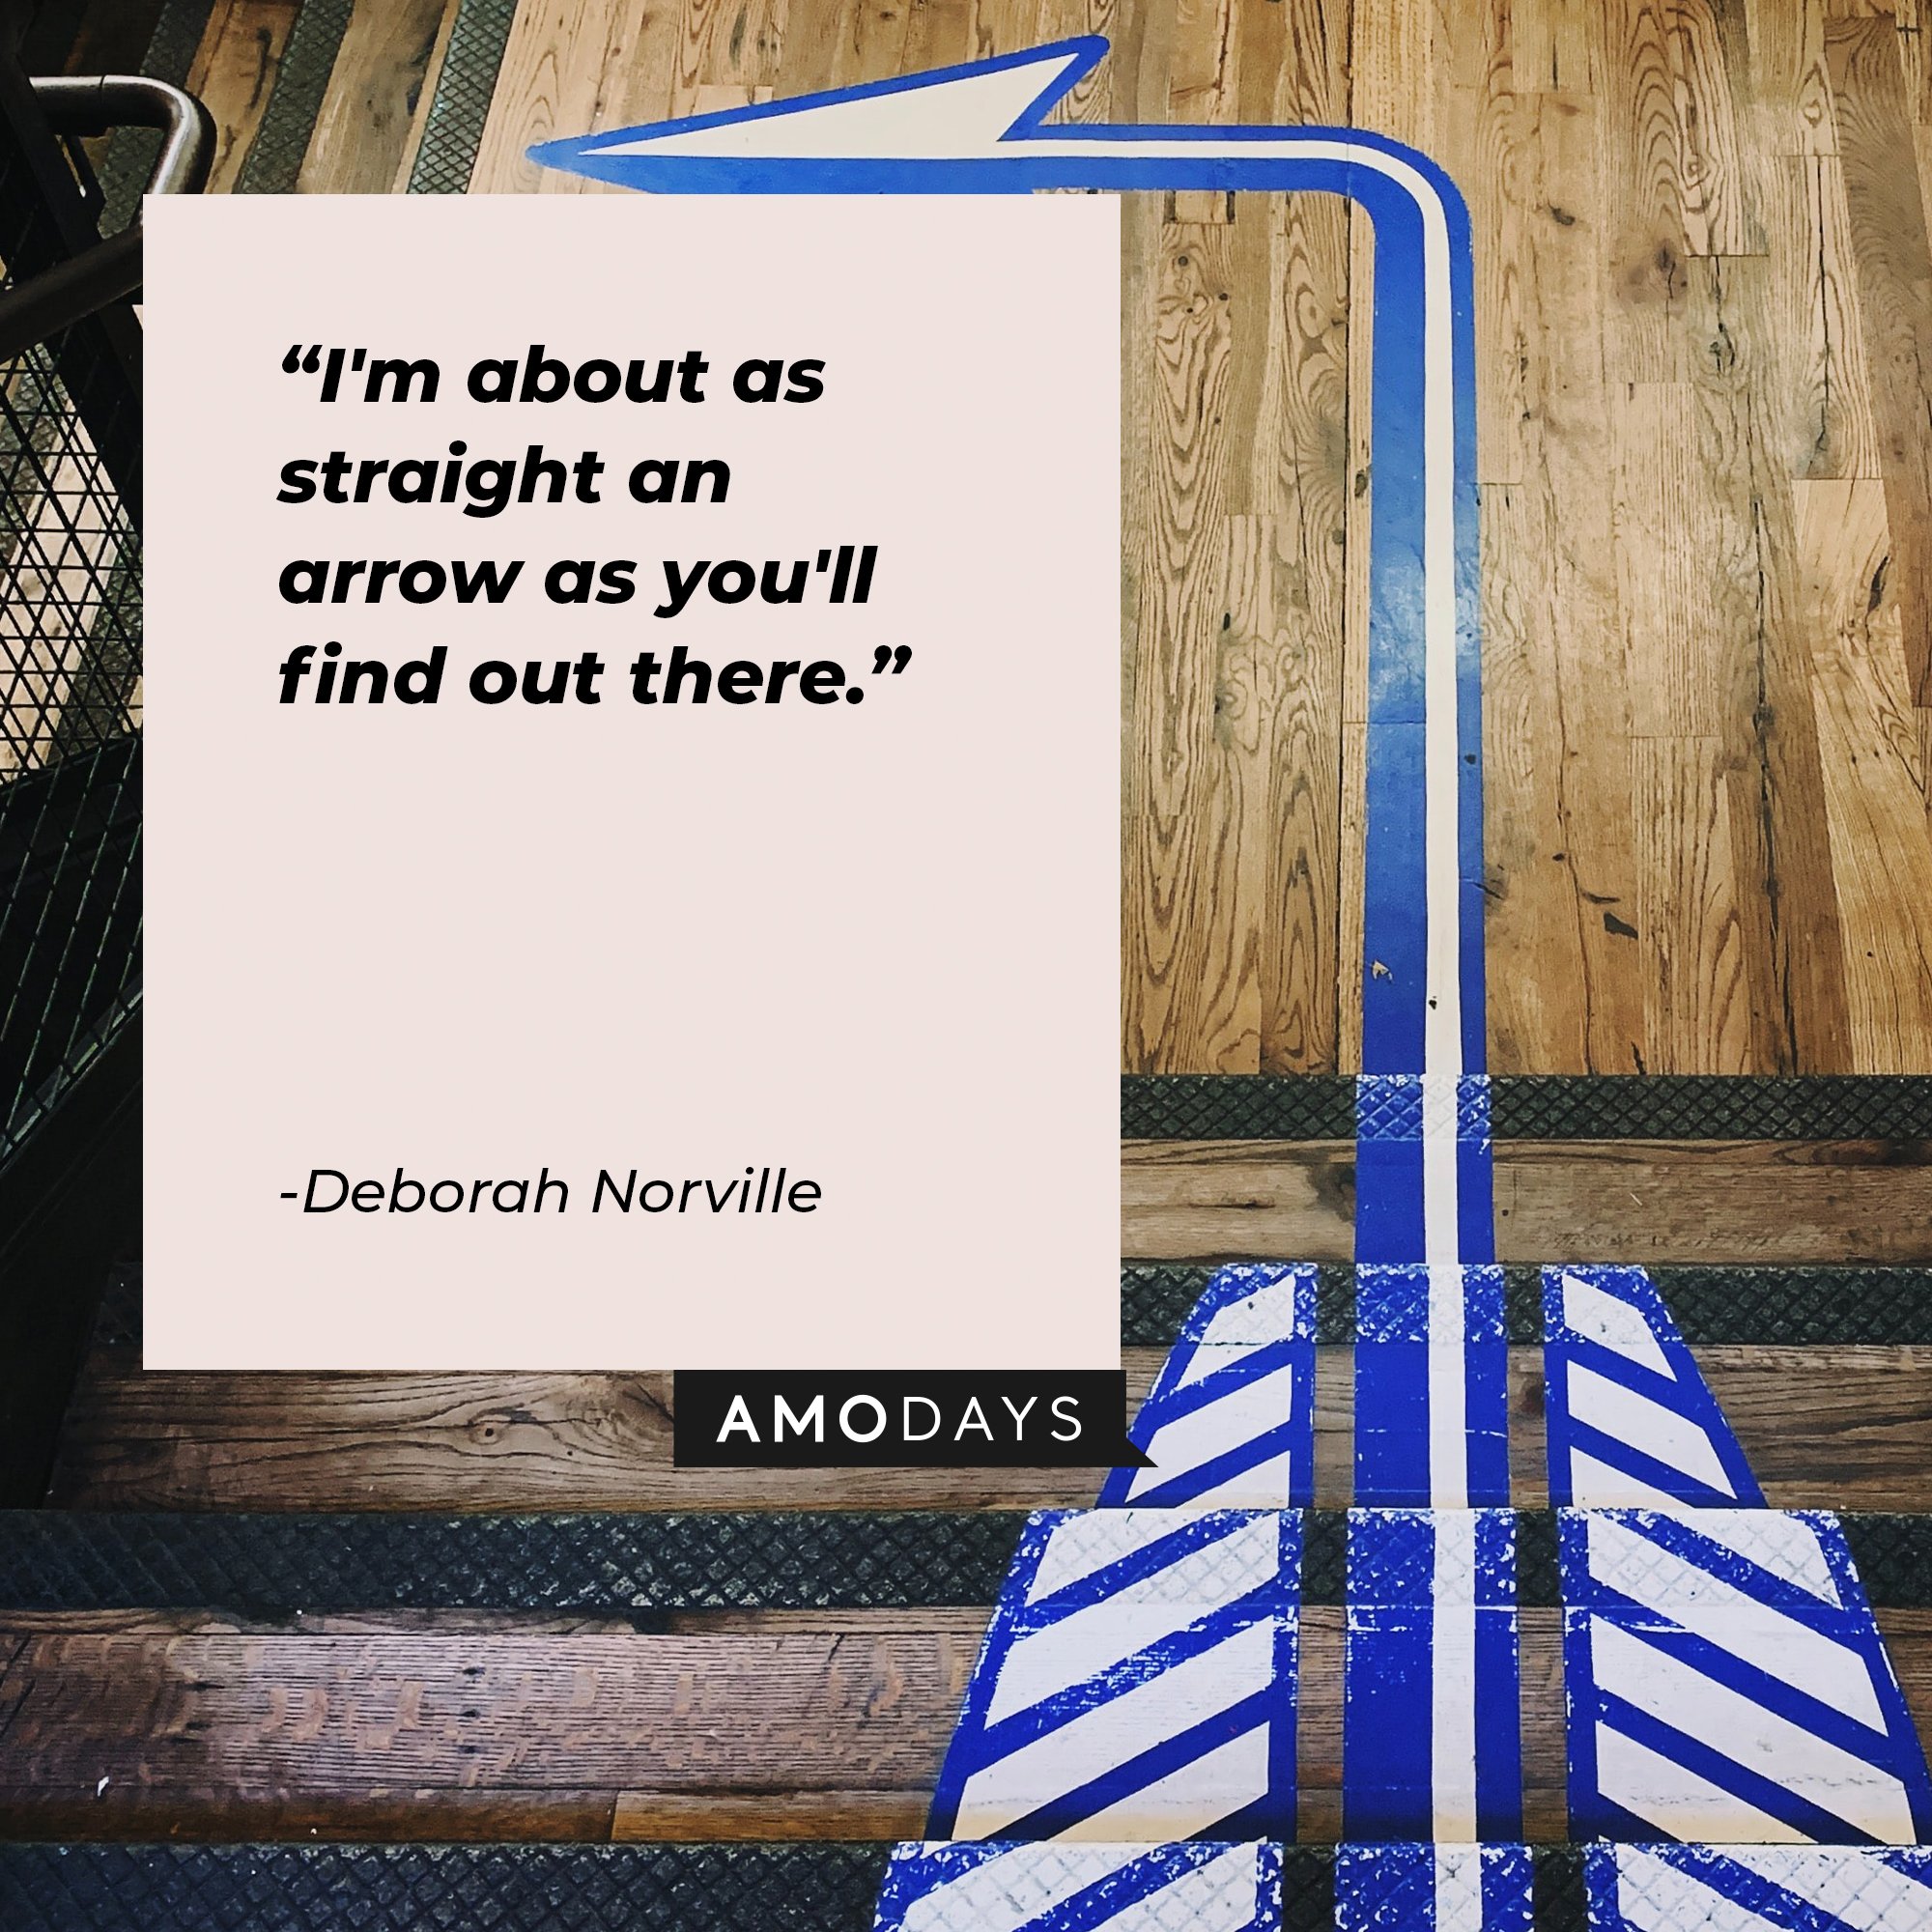  Deborah Norville’s quote: “I'm about as straight an arrow as you'll find out there.” | Image: AmoDays